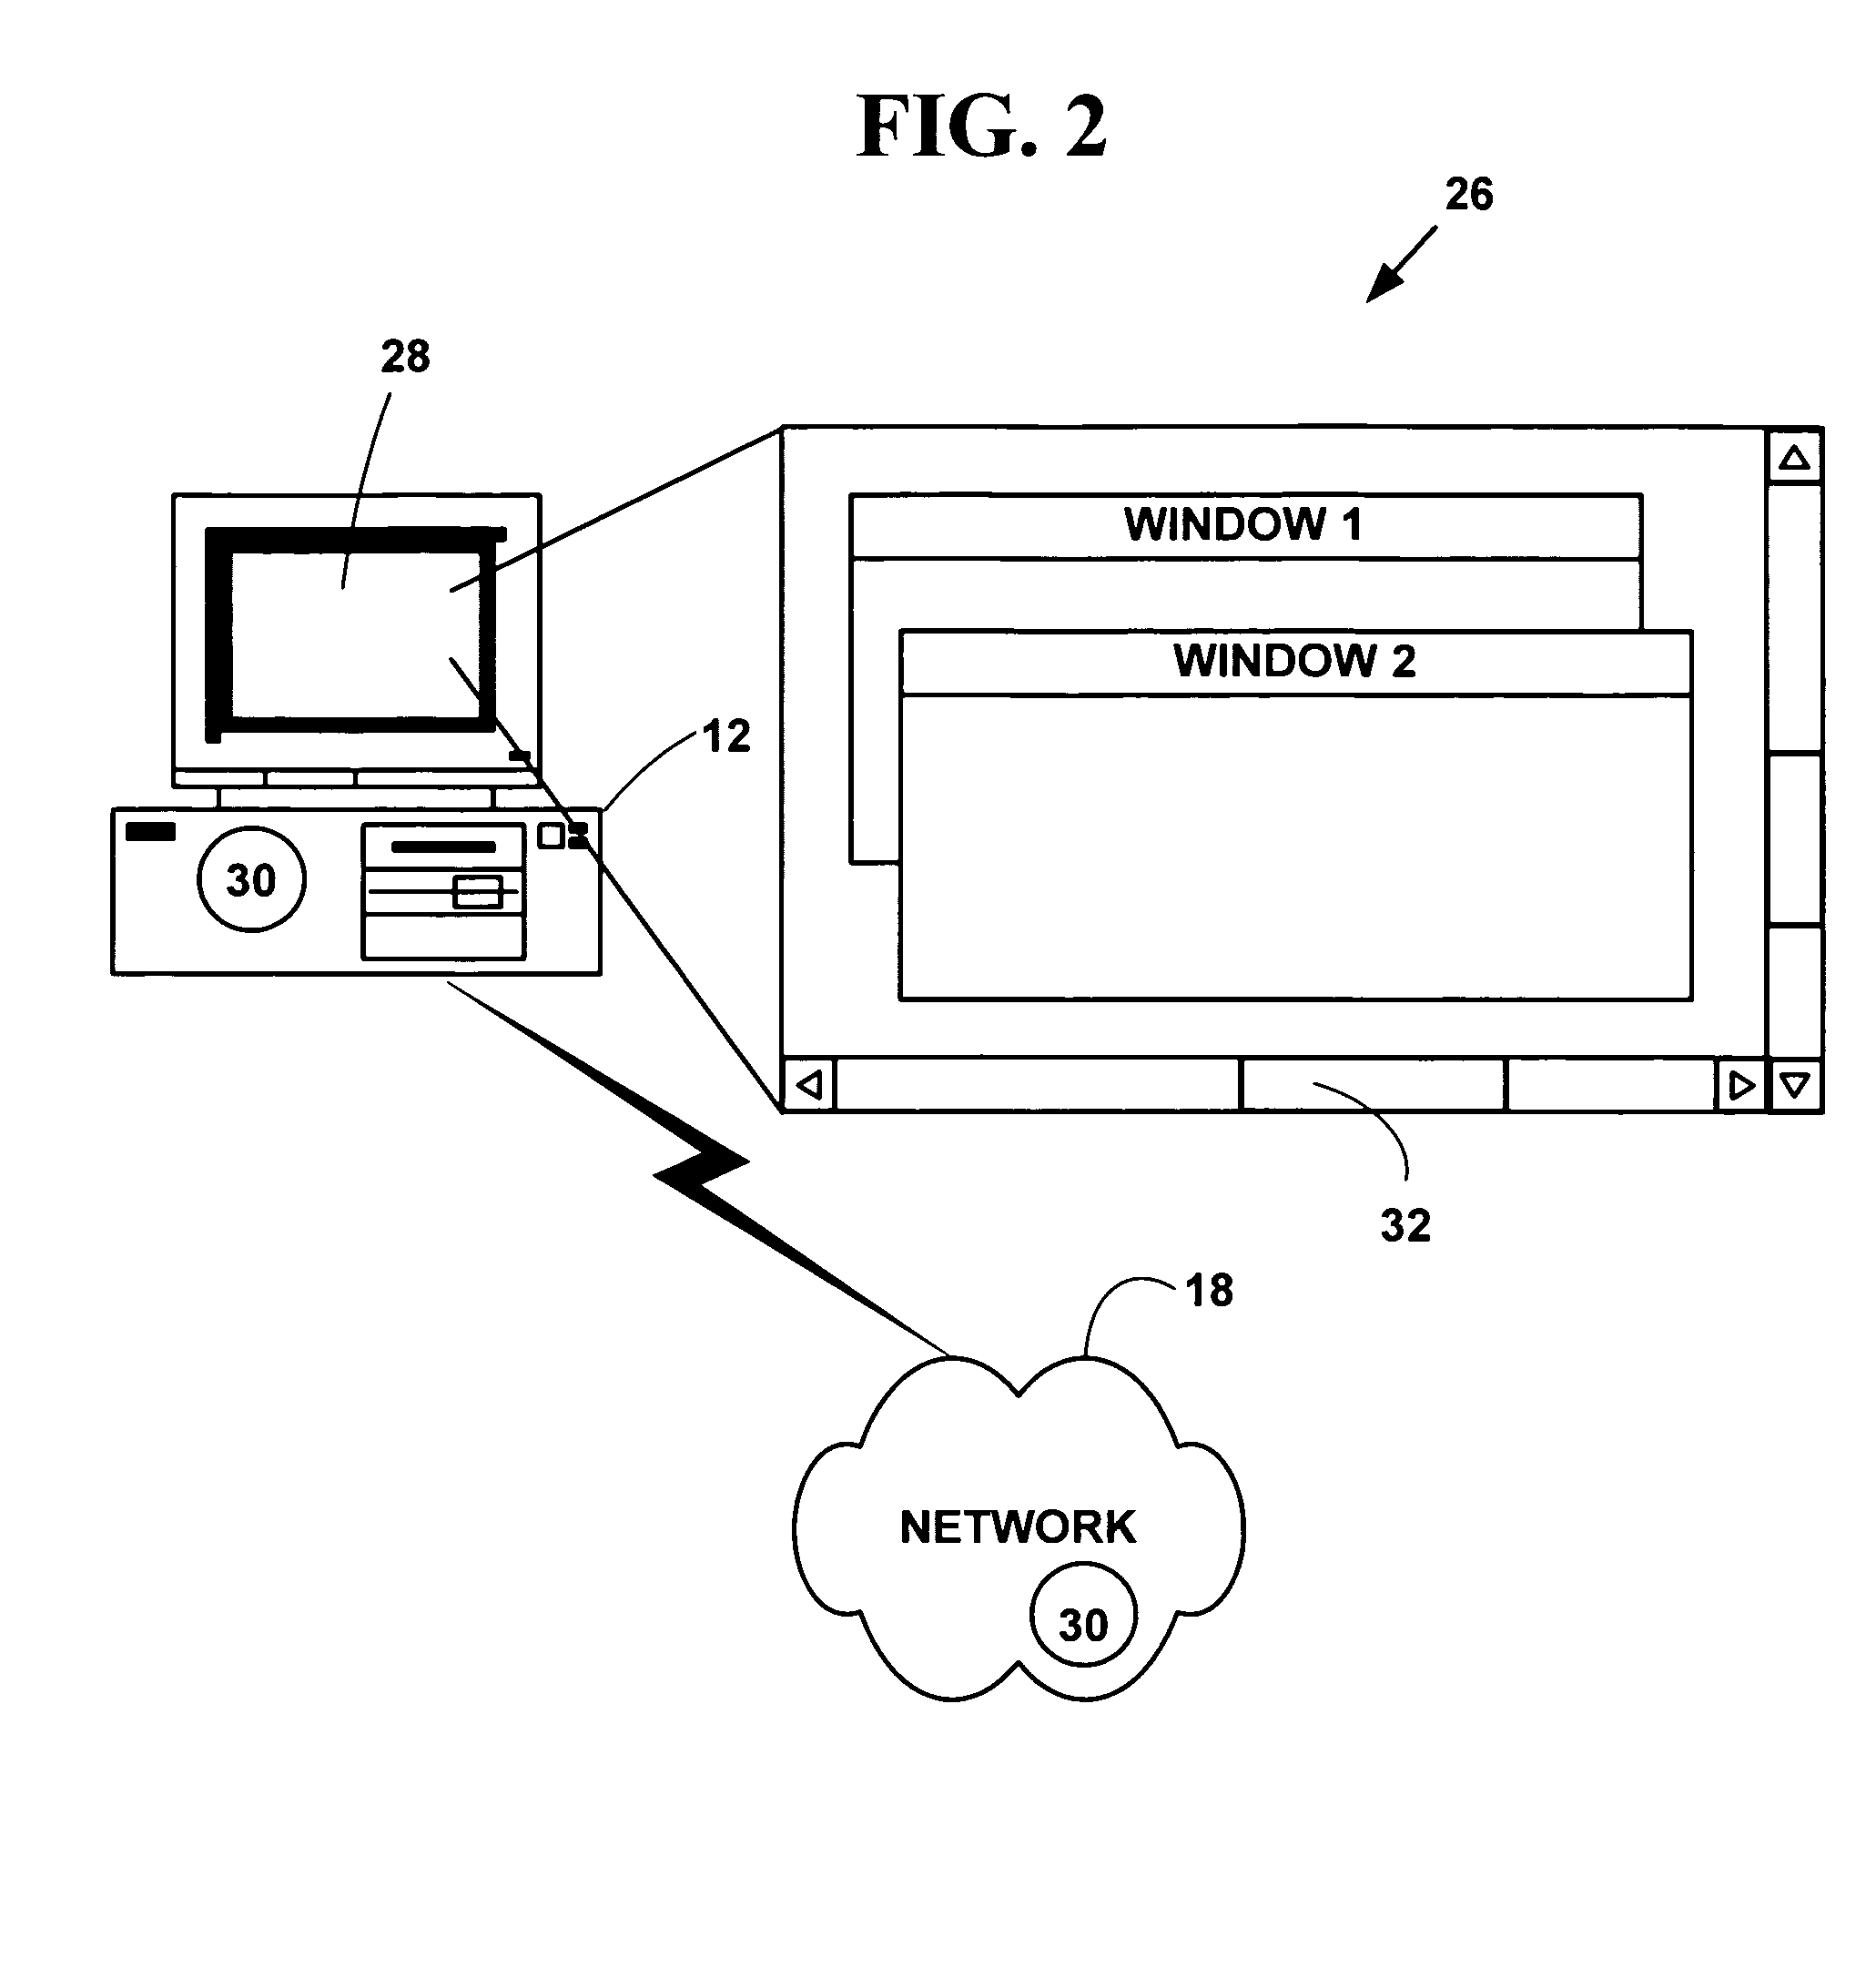 Method and system for displaying a current market depth position of an electronic trade on a graphical user interface